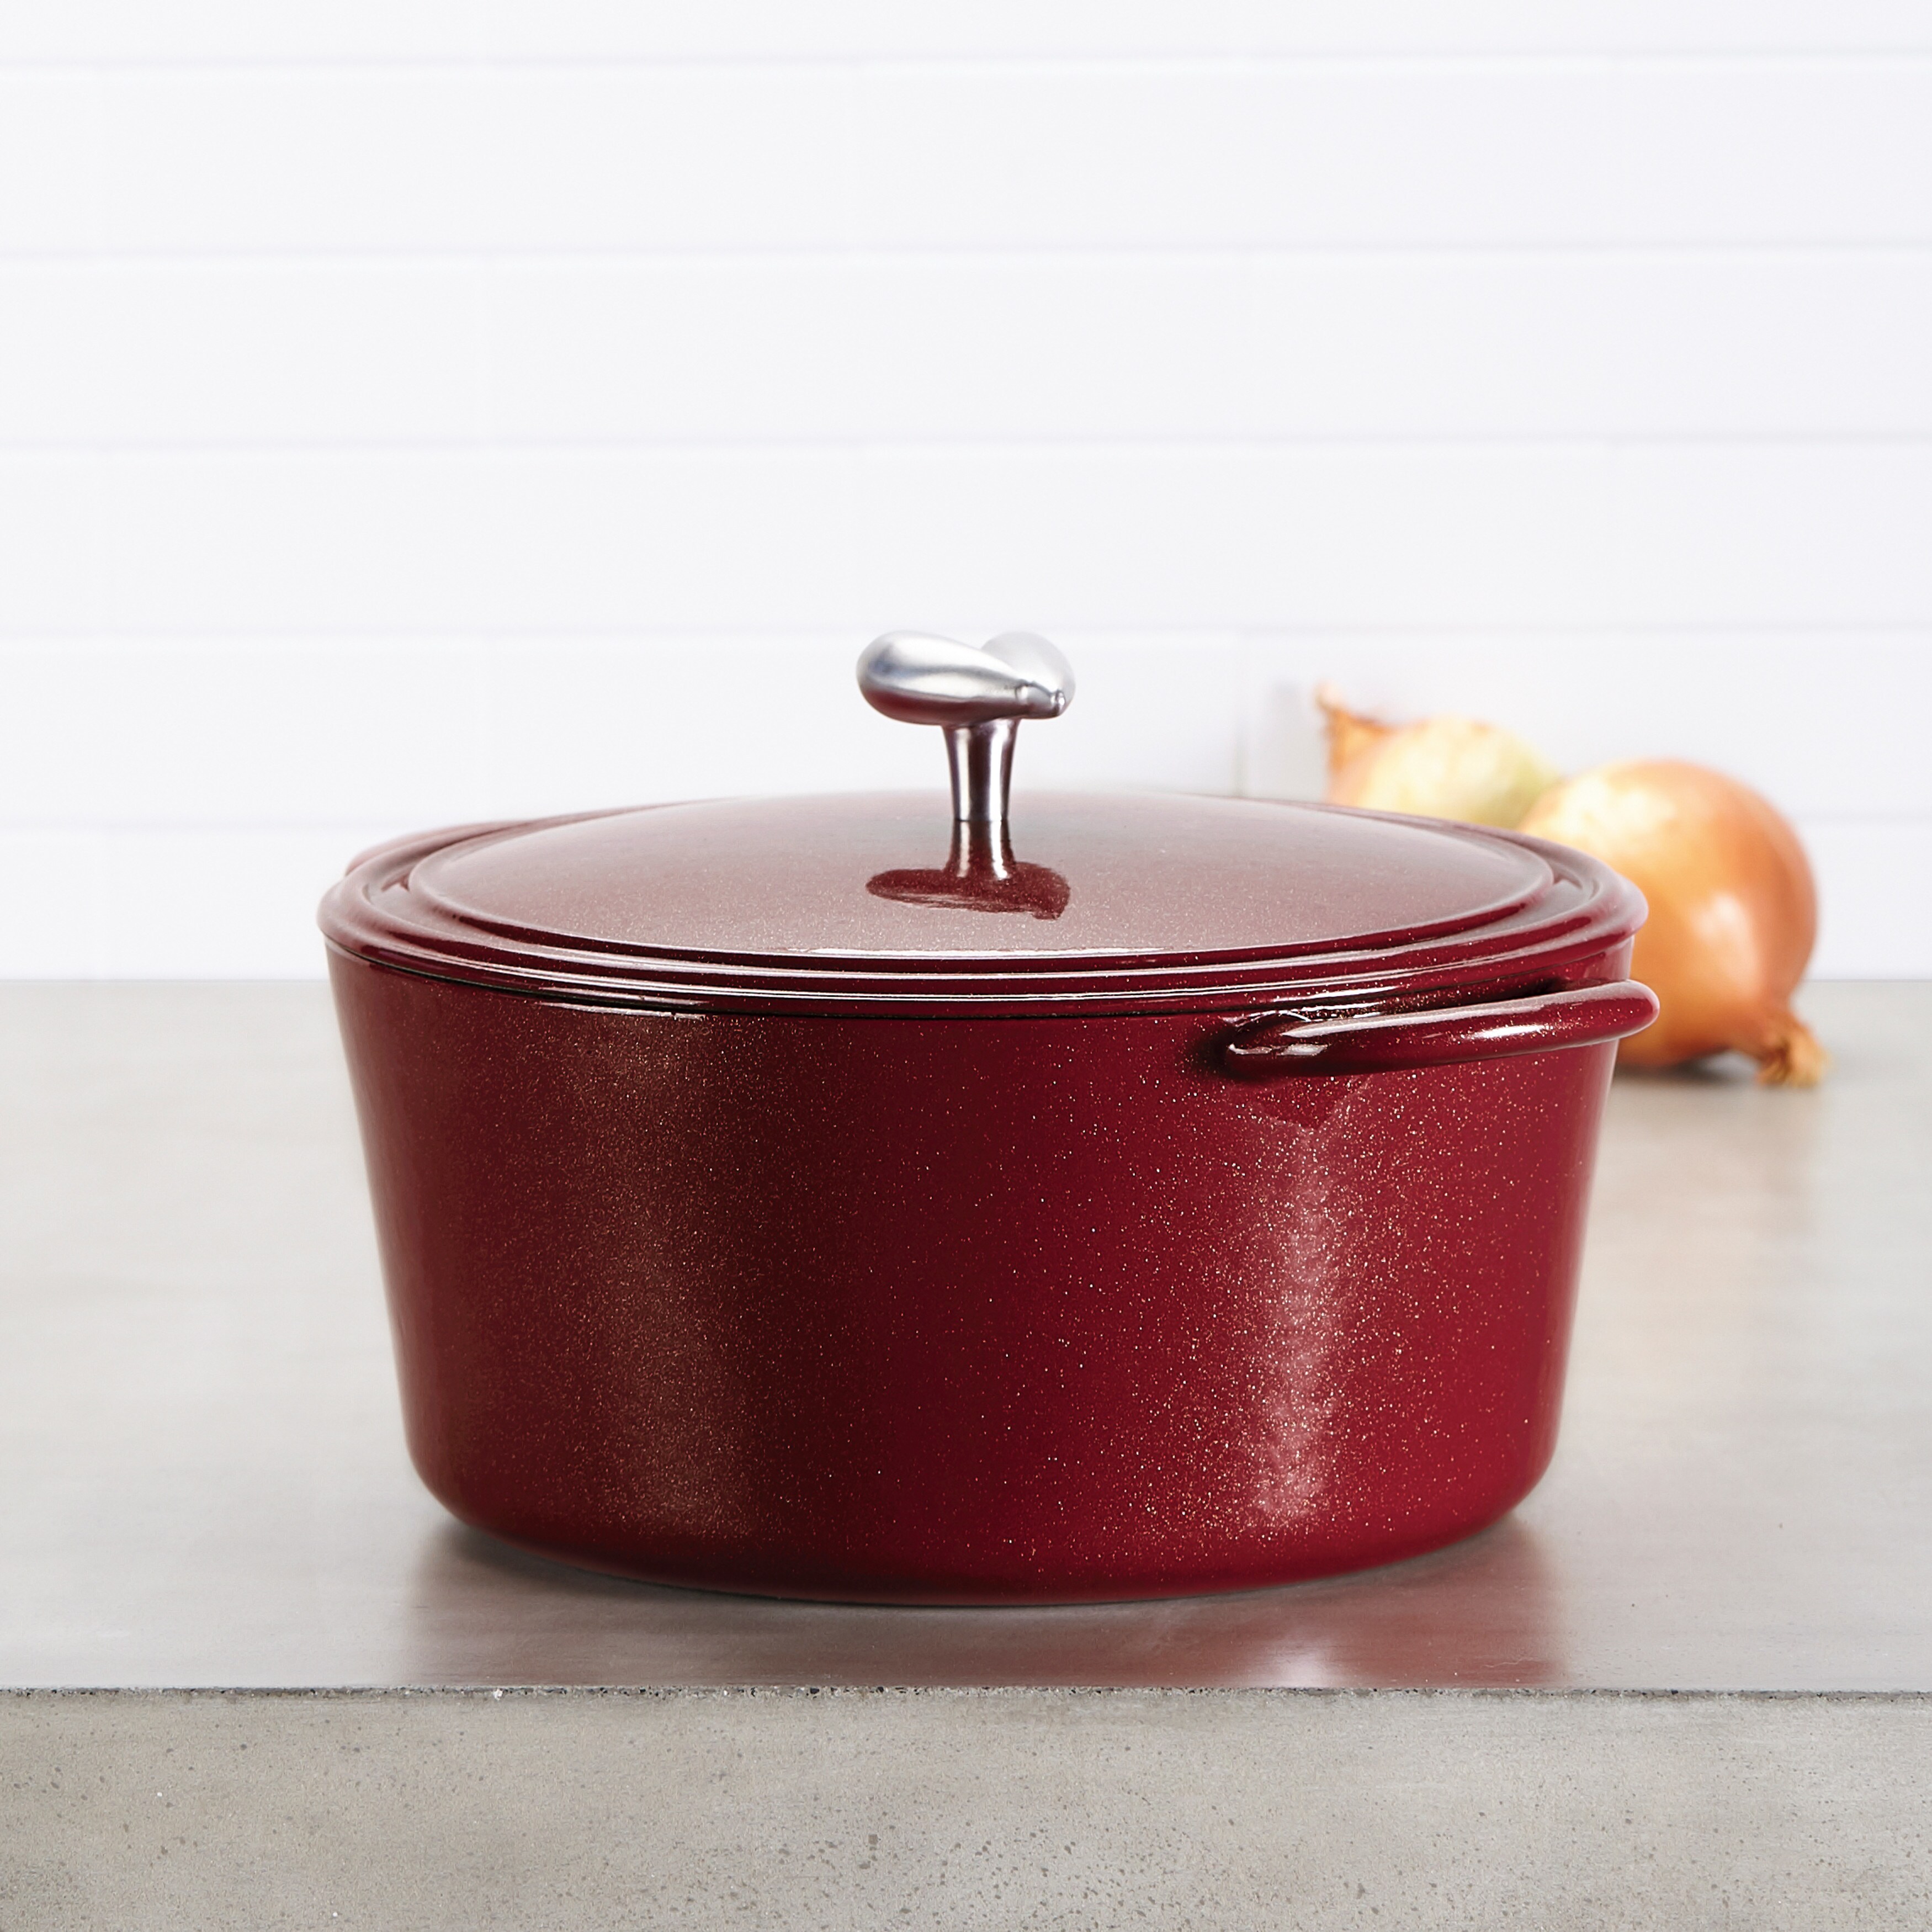 Ayesha Curry Cast Iron Enamel 6 Qt. Dutch Oven Selected As One Of This  Year's Oprah's Favorite Things - Meyer Corporation